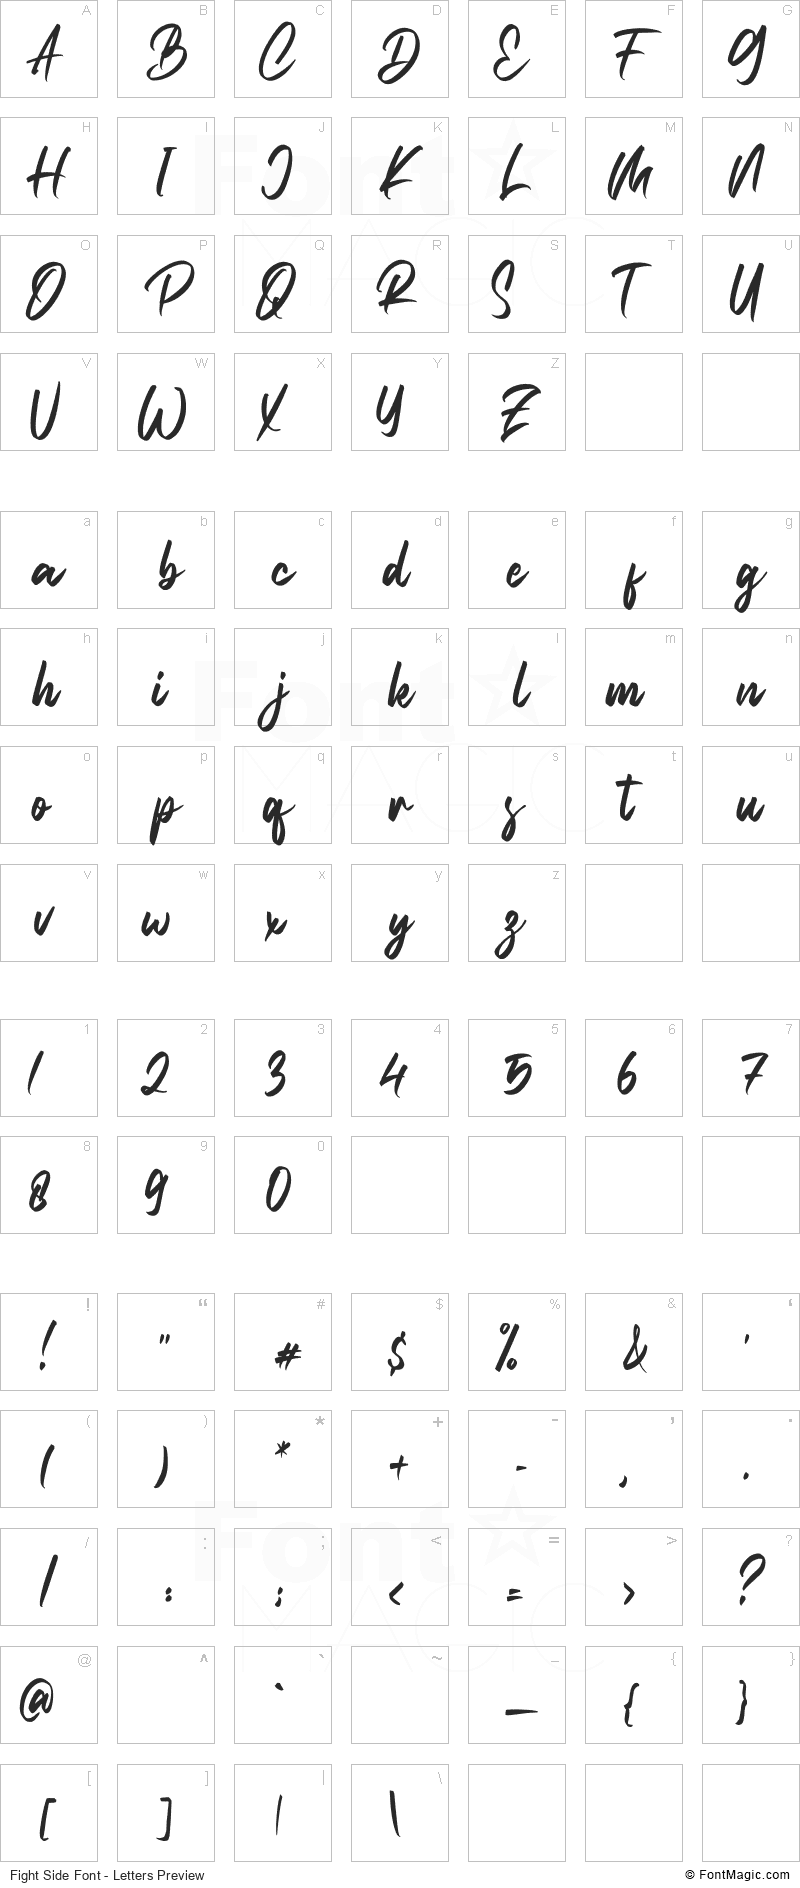 Fight Side Font - All Latters Preview Chart